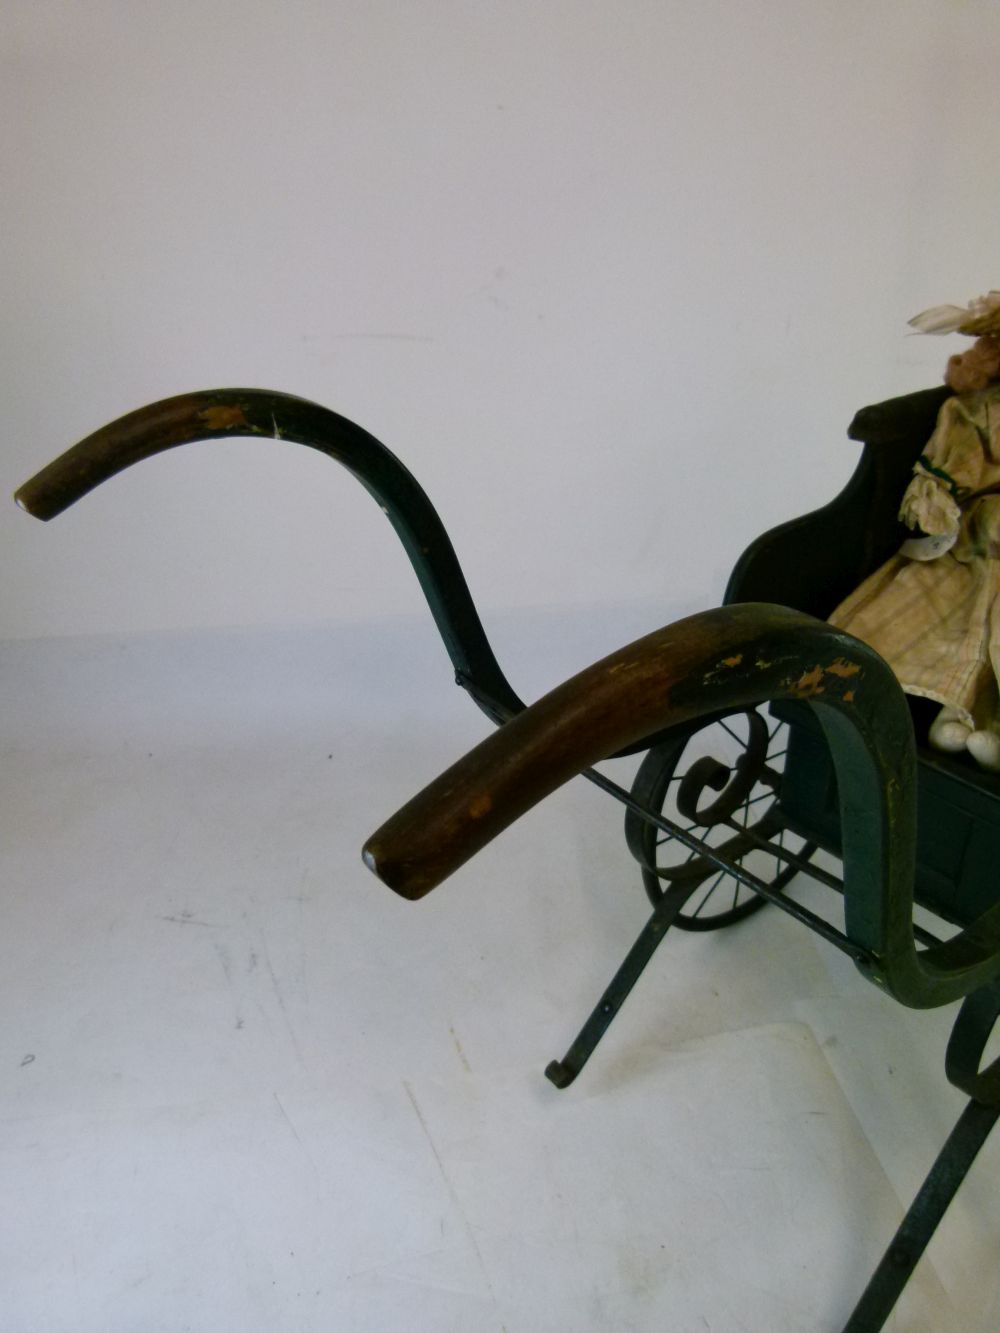 Late Victorian green painted wooden and iron perambulator (pram), with deep-buttoned hide seat- - Image 3 of 8